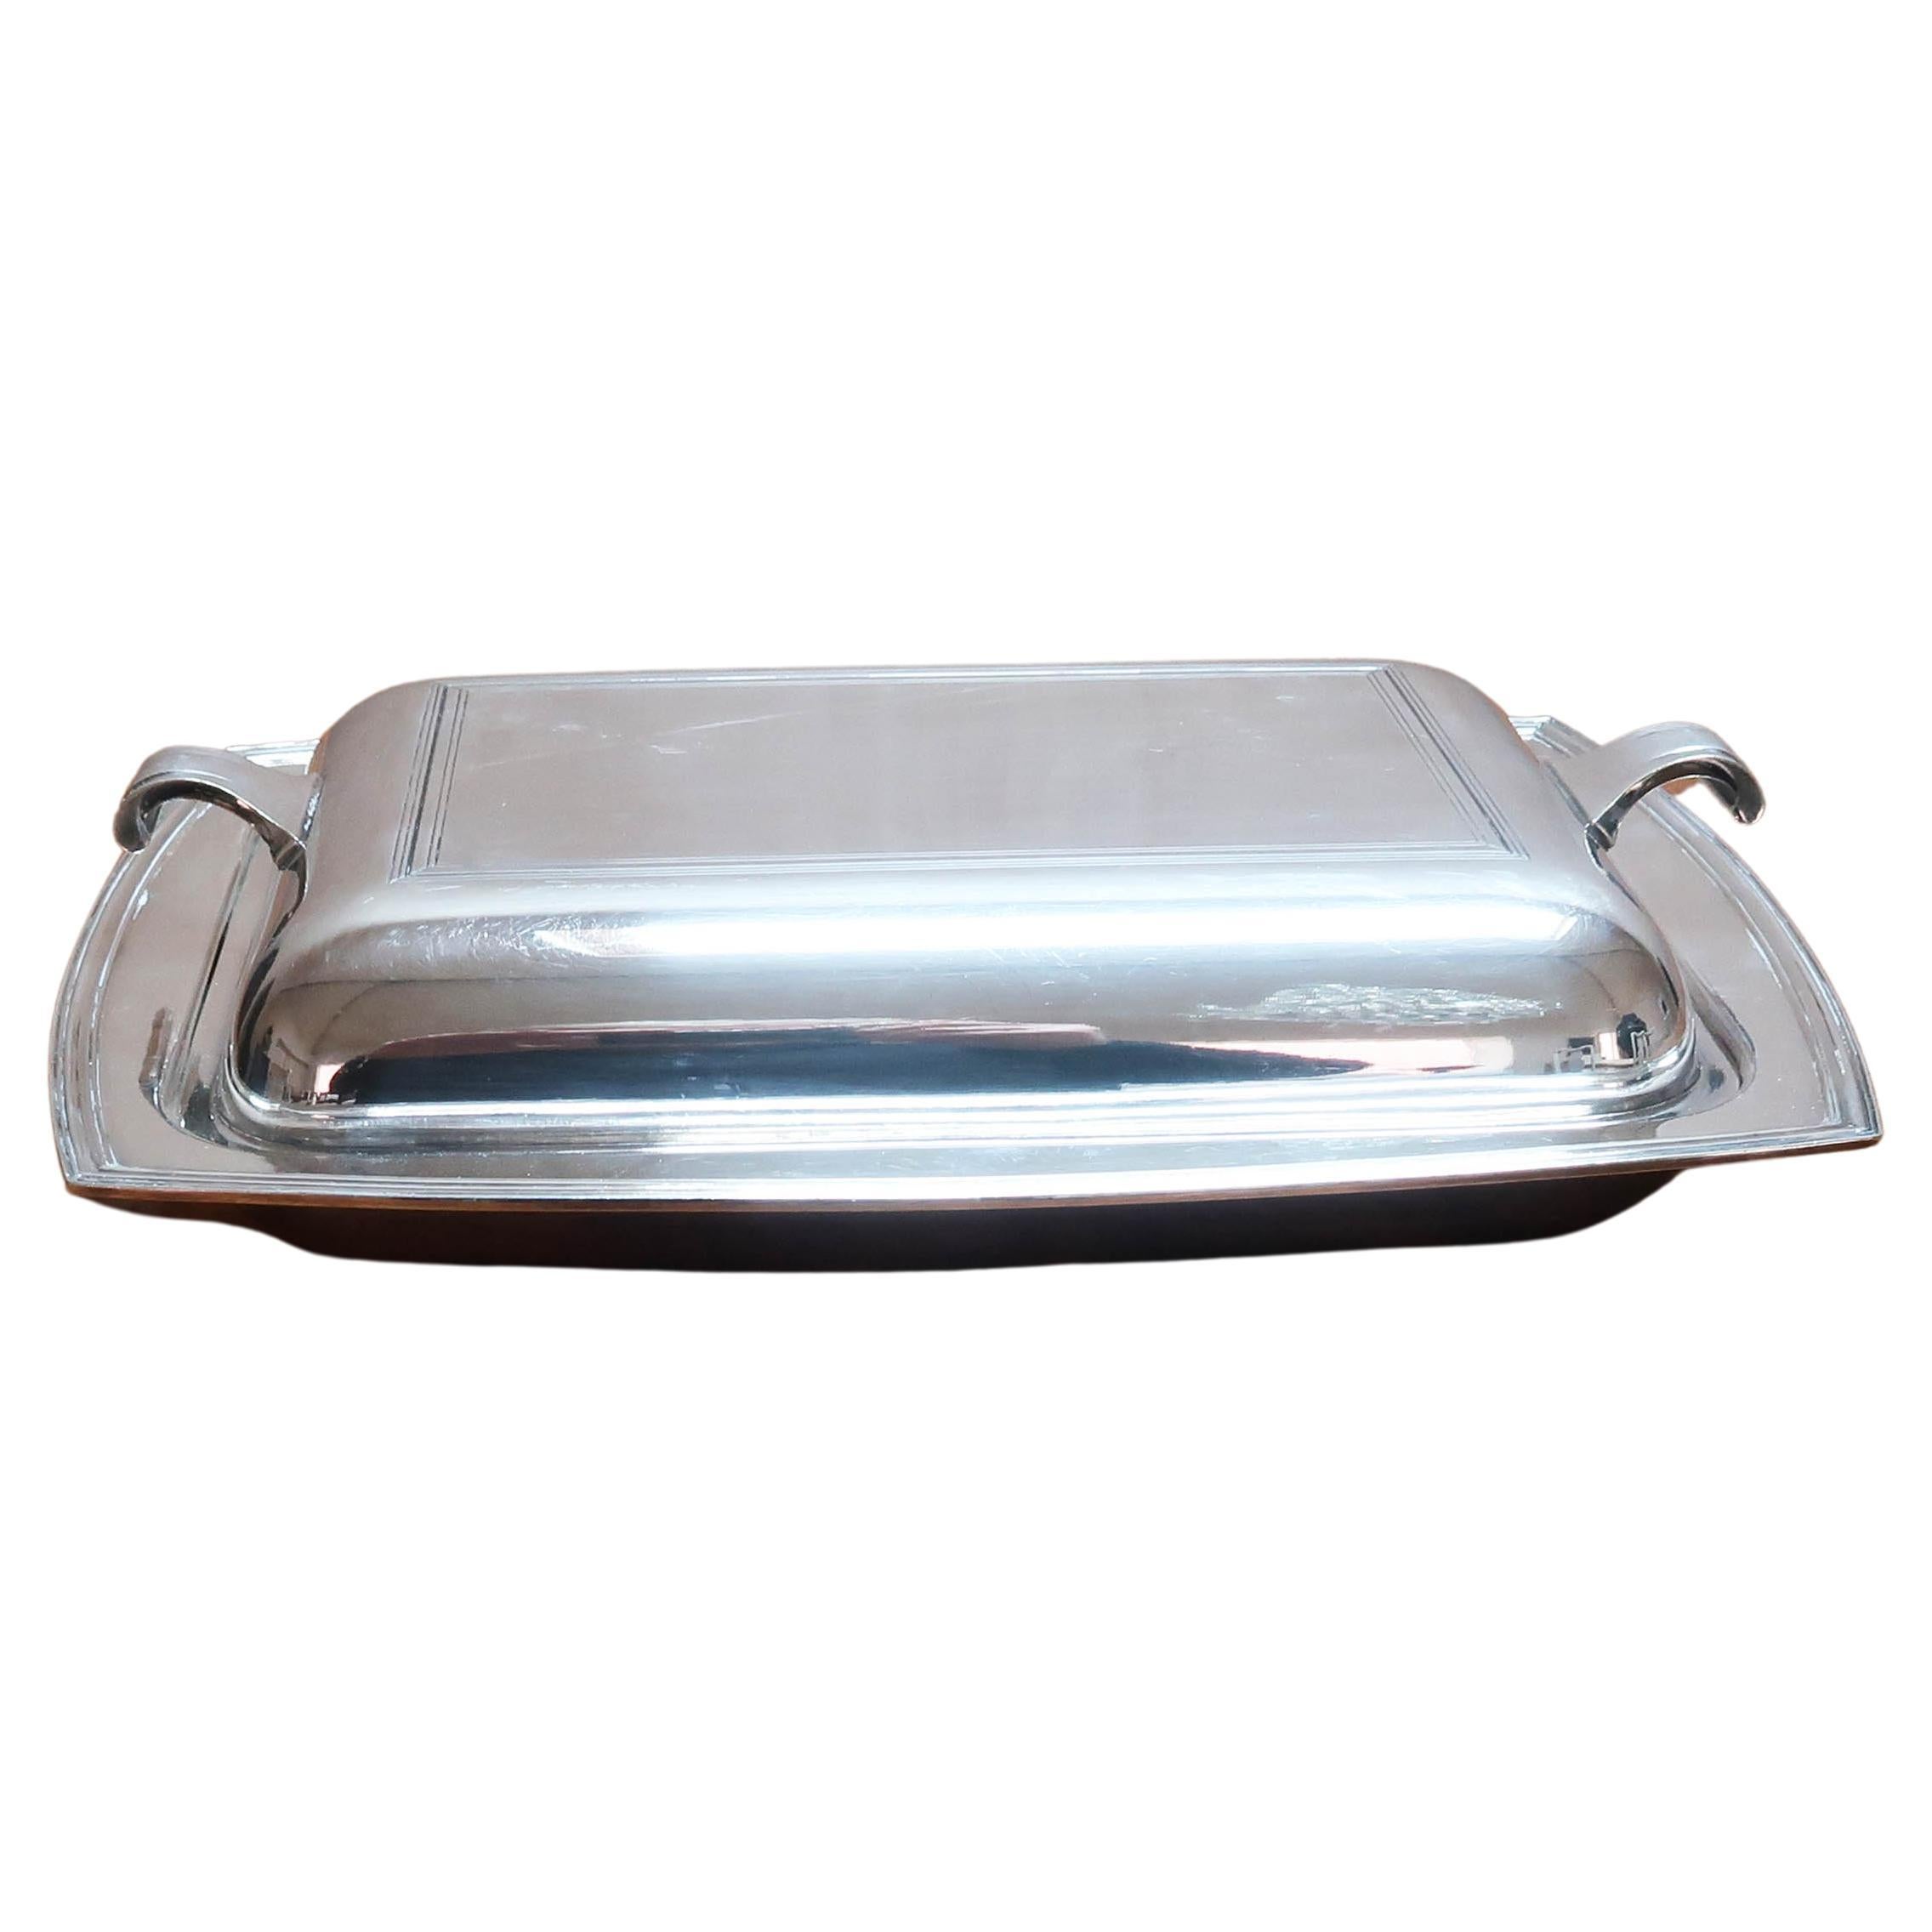 Art Deco Silver Plated Entree or Serving Dish, English C.1930 For Sale